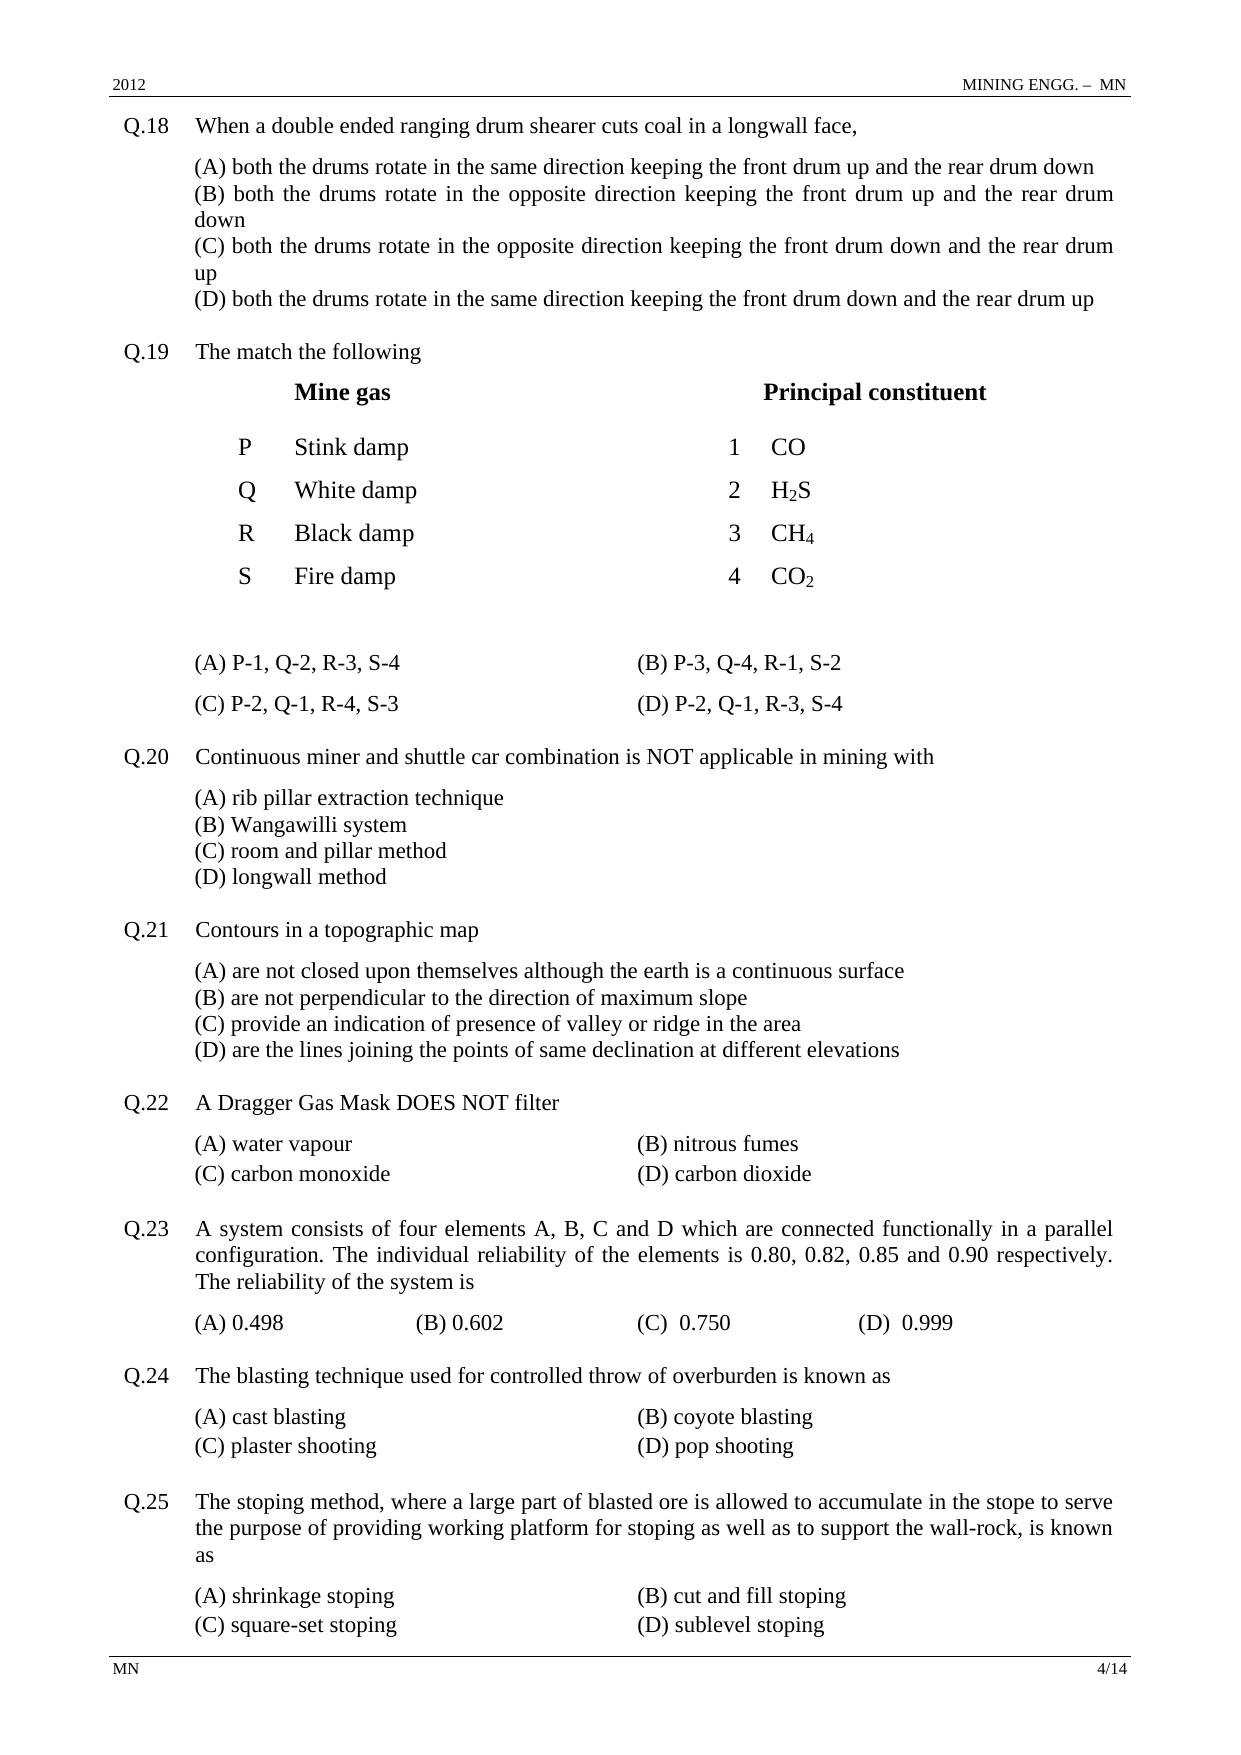 GATE 2012 Mining Engineering (MN) Question Paper with Answer Key - Page 4